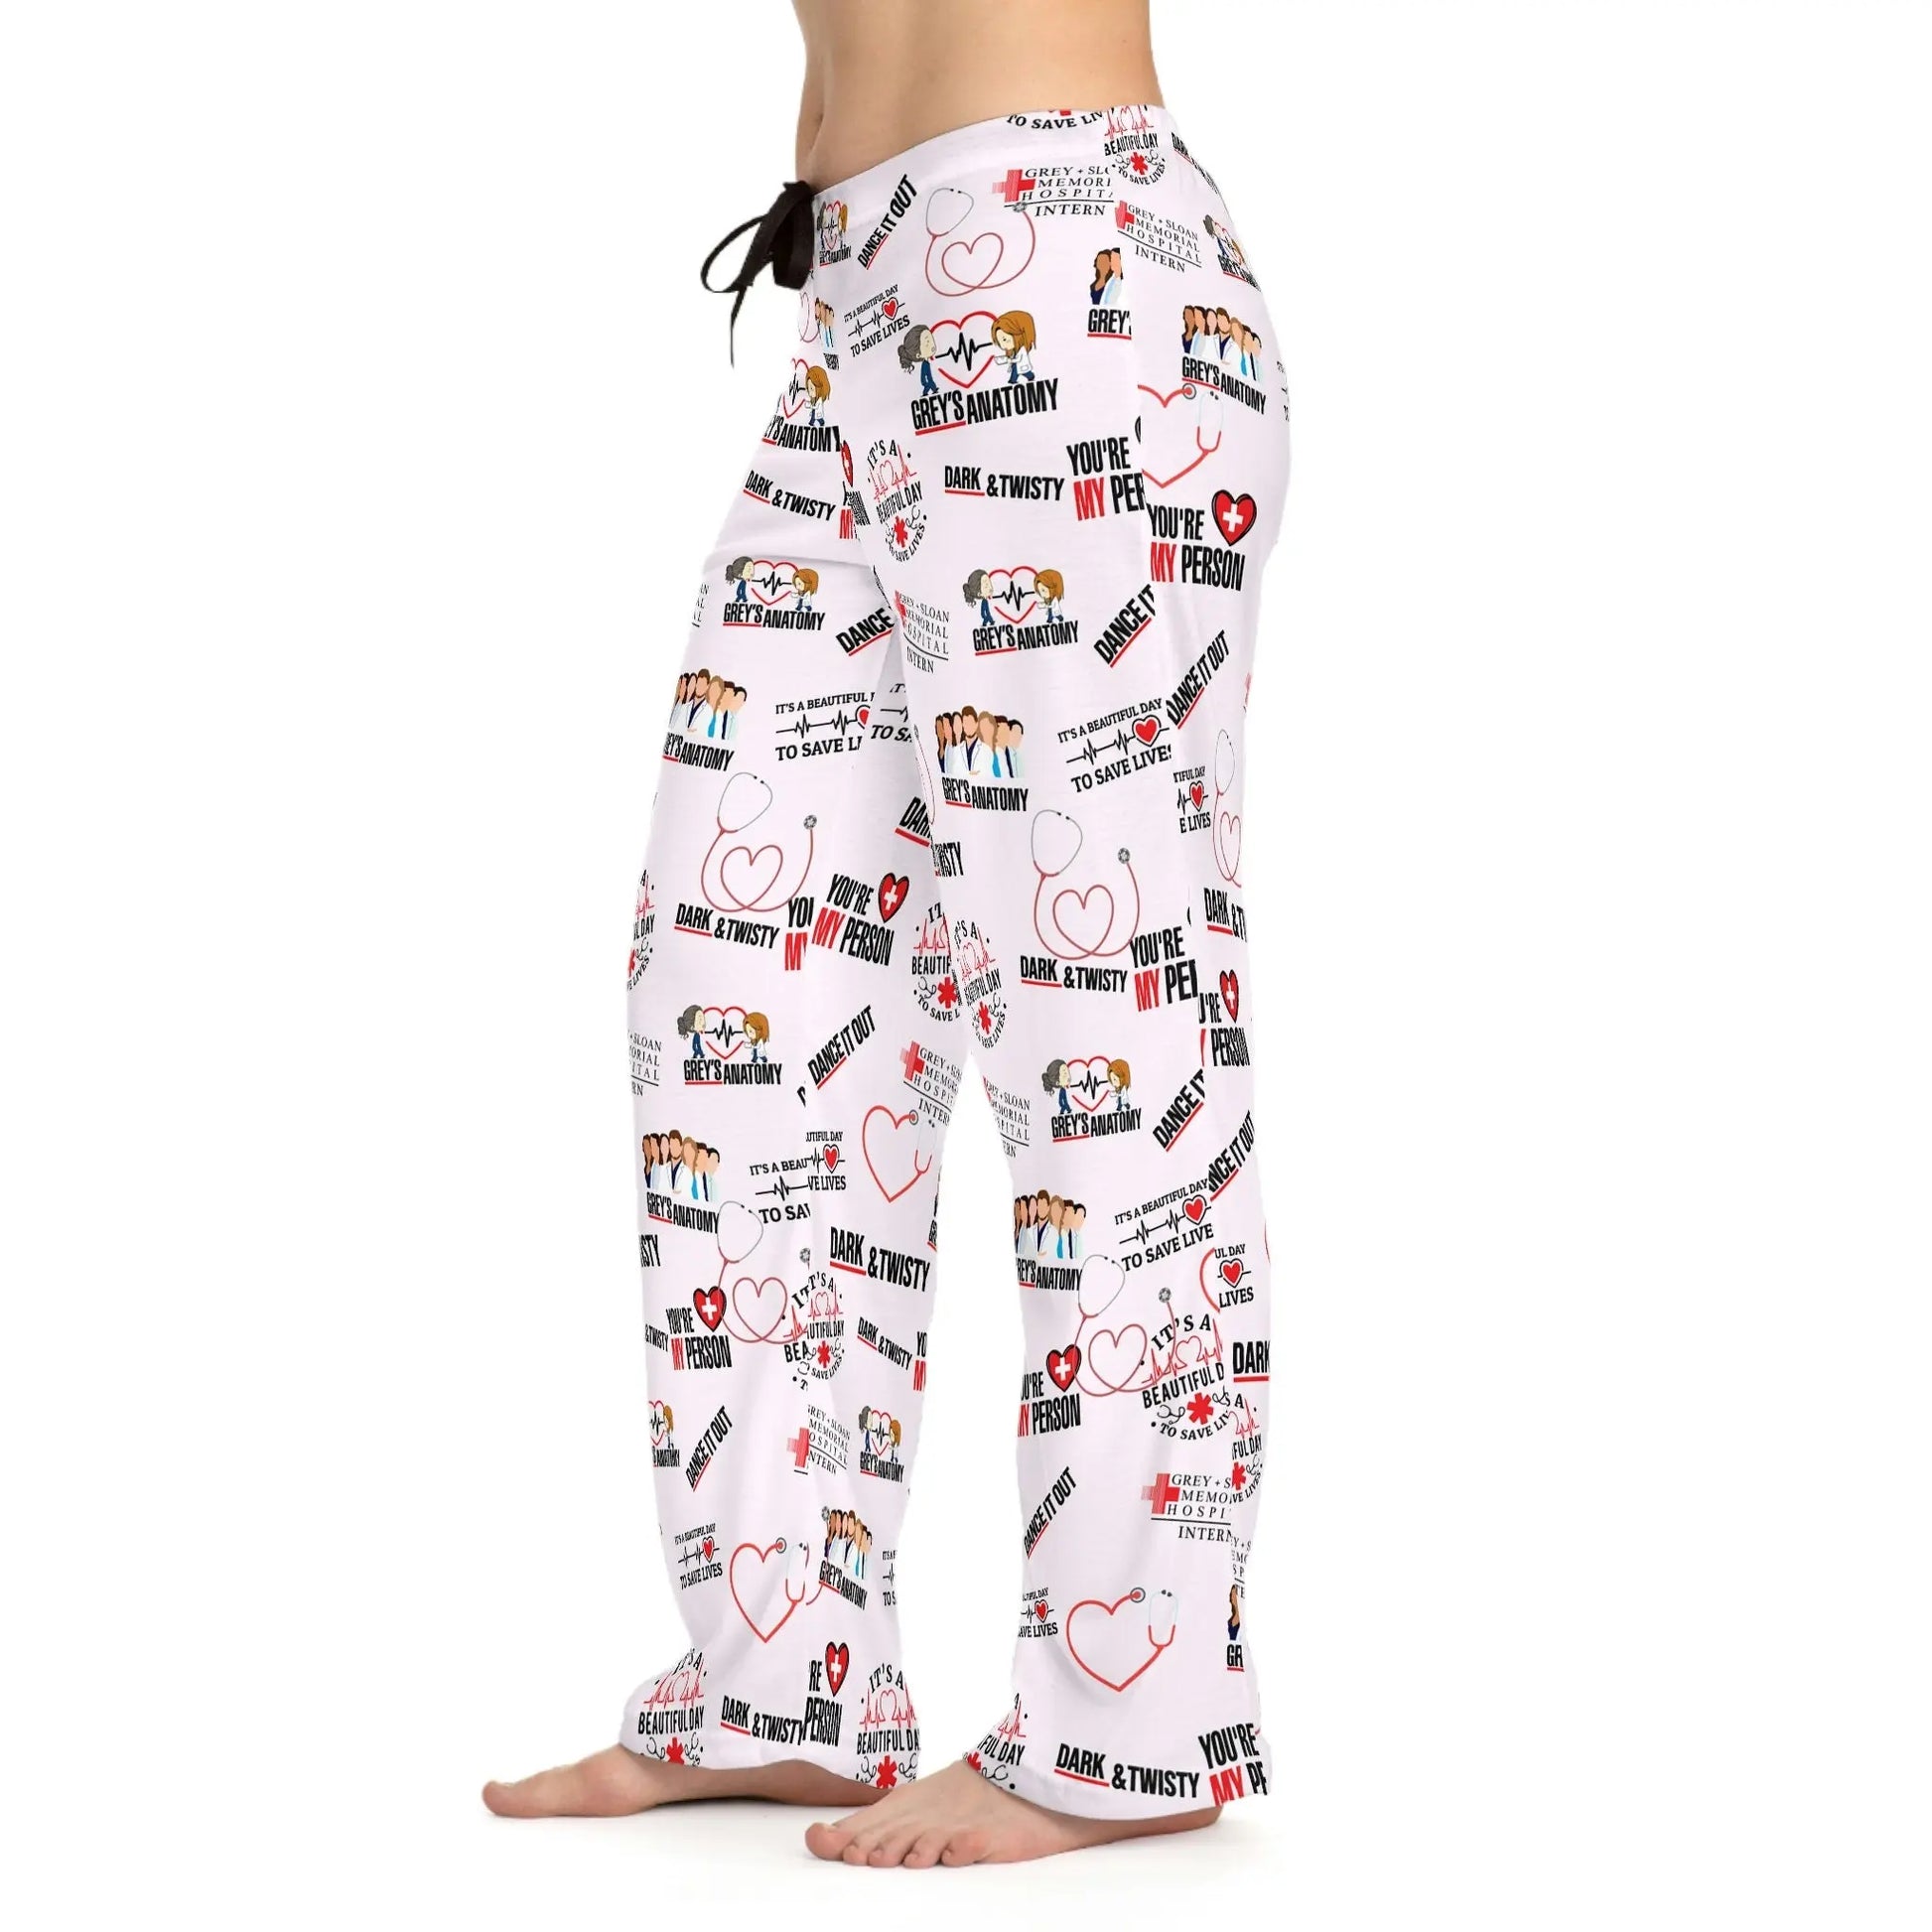 Greys Anatomy Women's Pajama Pants PJ Bottoms Valentines gift for her  gift for mom wife girlfriend Greys Anatomy Fans Youre my person Latchkey